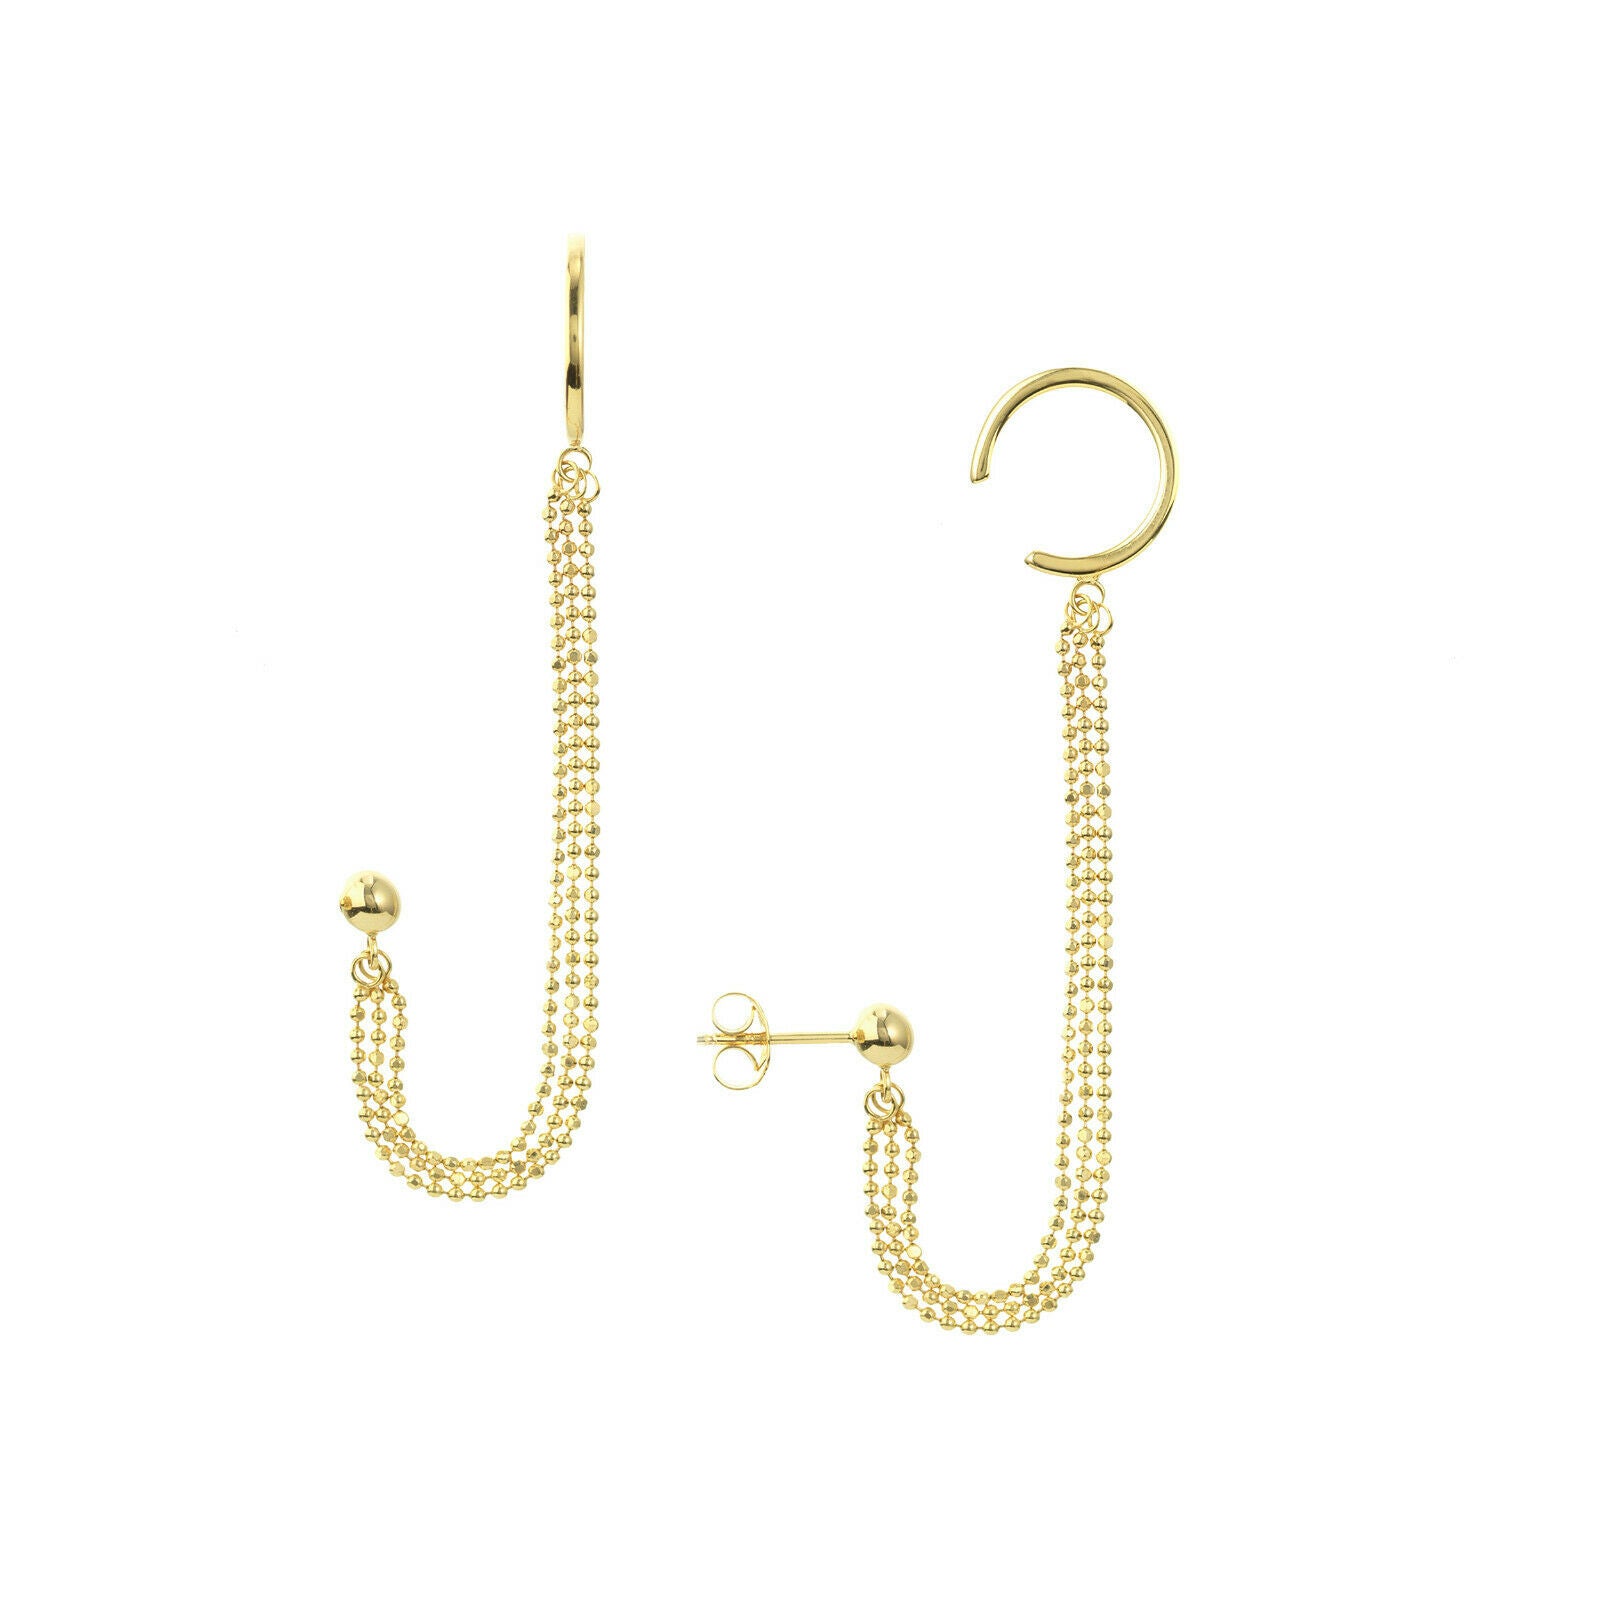 14K Solid Yellow Gold Triple Strand Earrings with Ear Cuff -